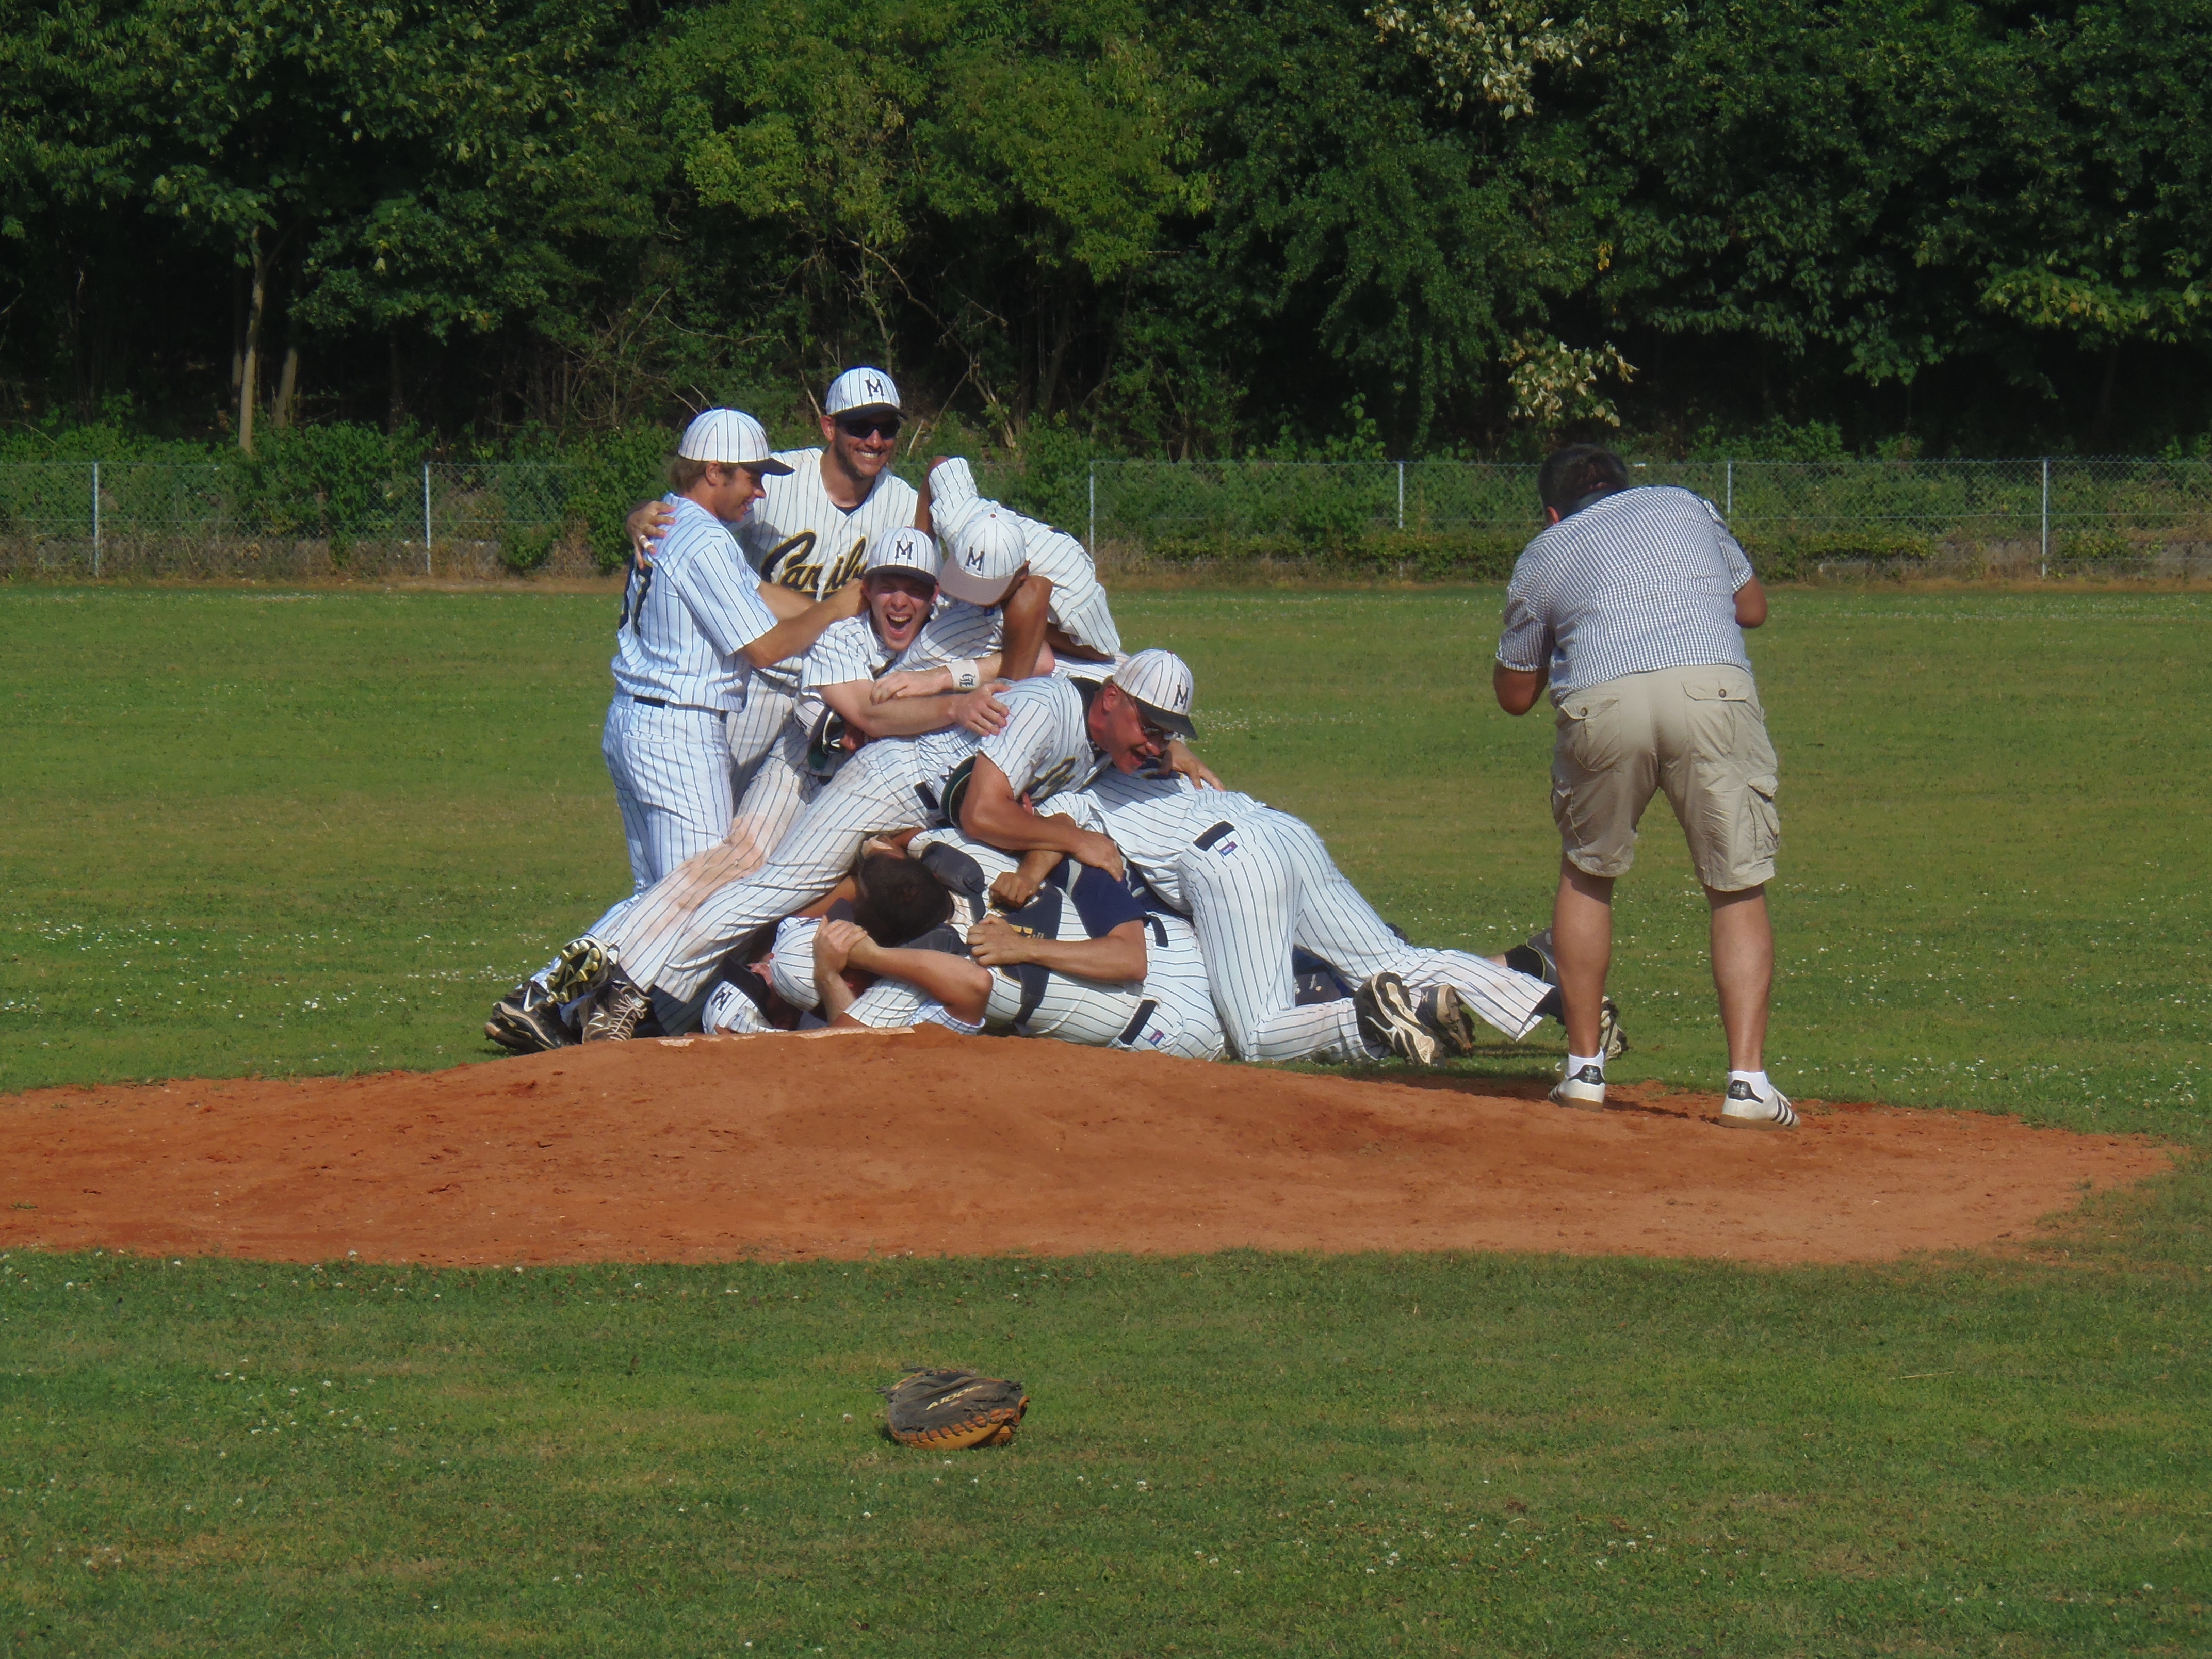 The Munich Caribes baseball players celebrate with a traditional pile-up on the pitcher's mound after clinching the Regionalliga championship on Saturday.
Photo: Douglas Sutton